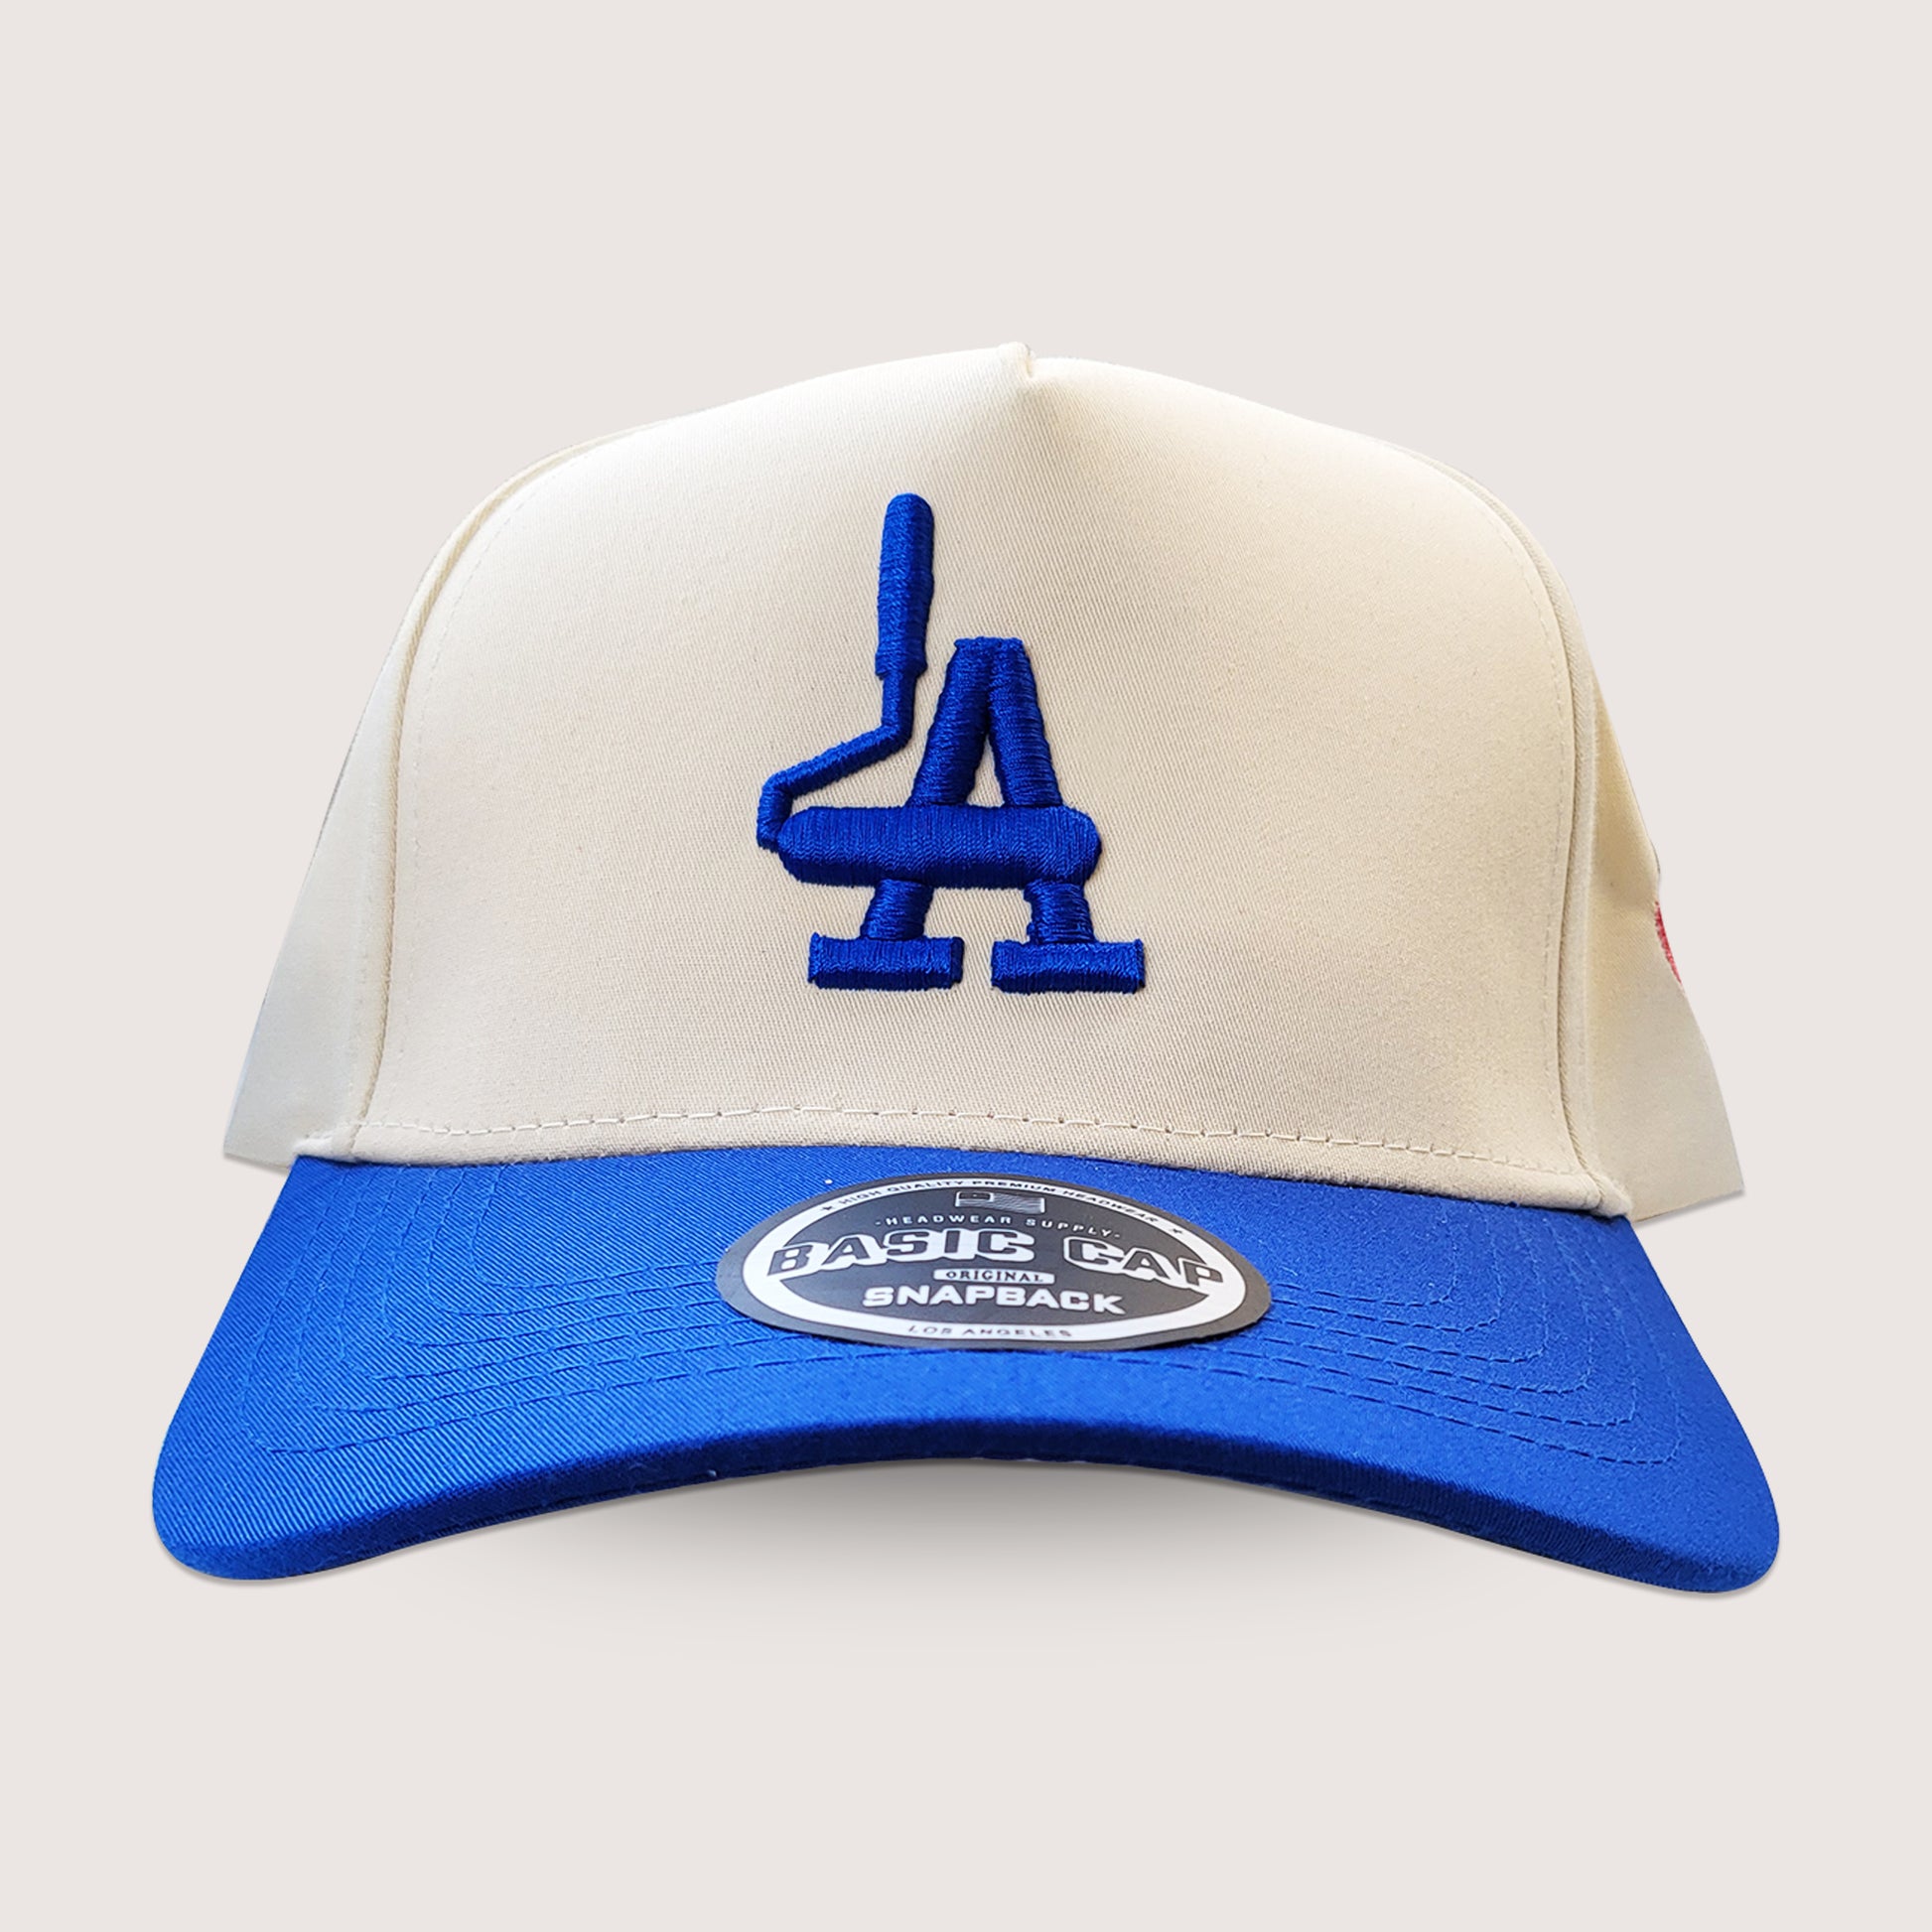 Phatcaps brand cream baseball cap with dodger blue embroidery.